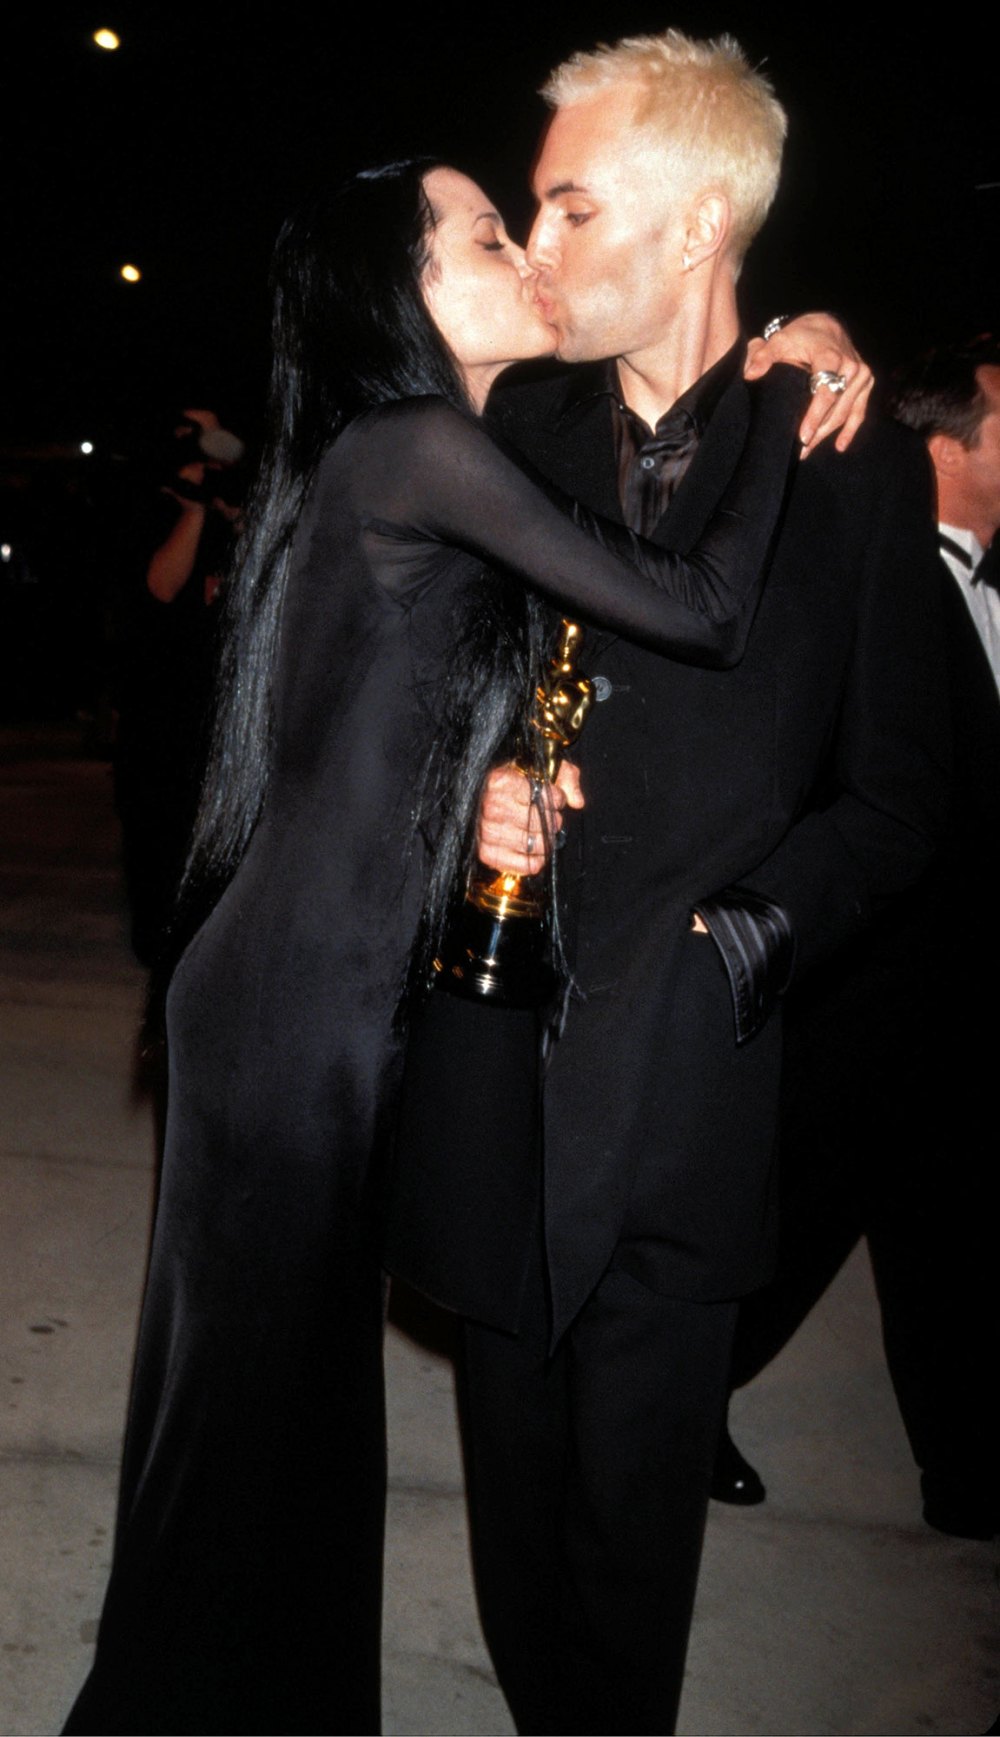 Angelina Jolie Oscar Kiss With Her Brother James Haven